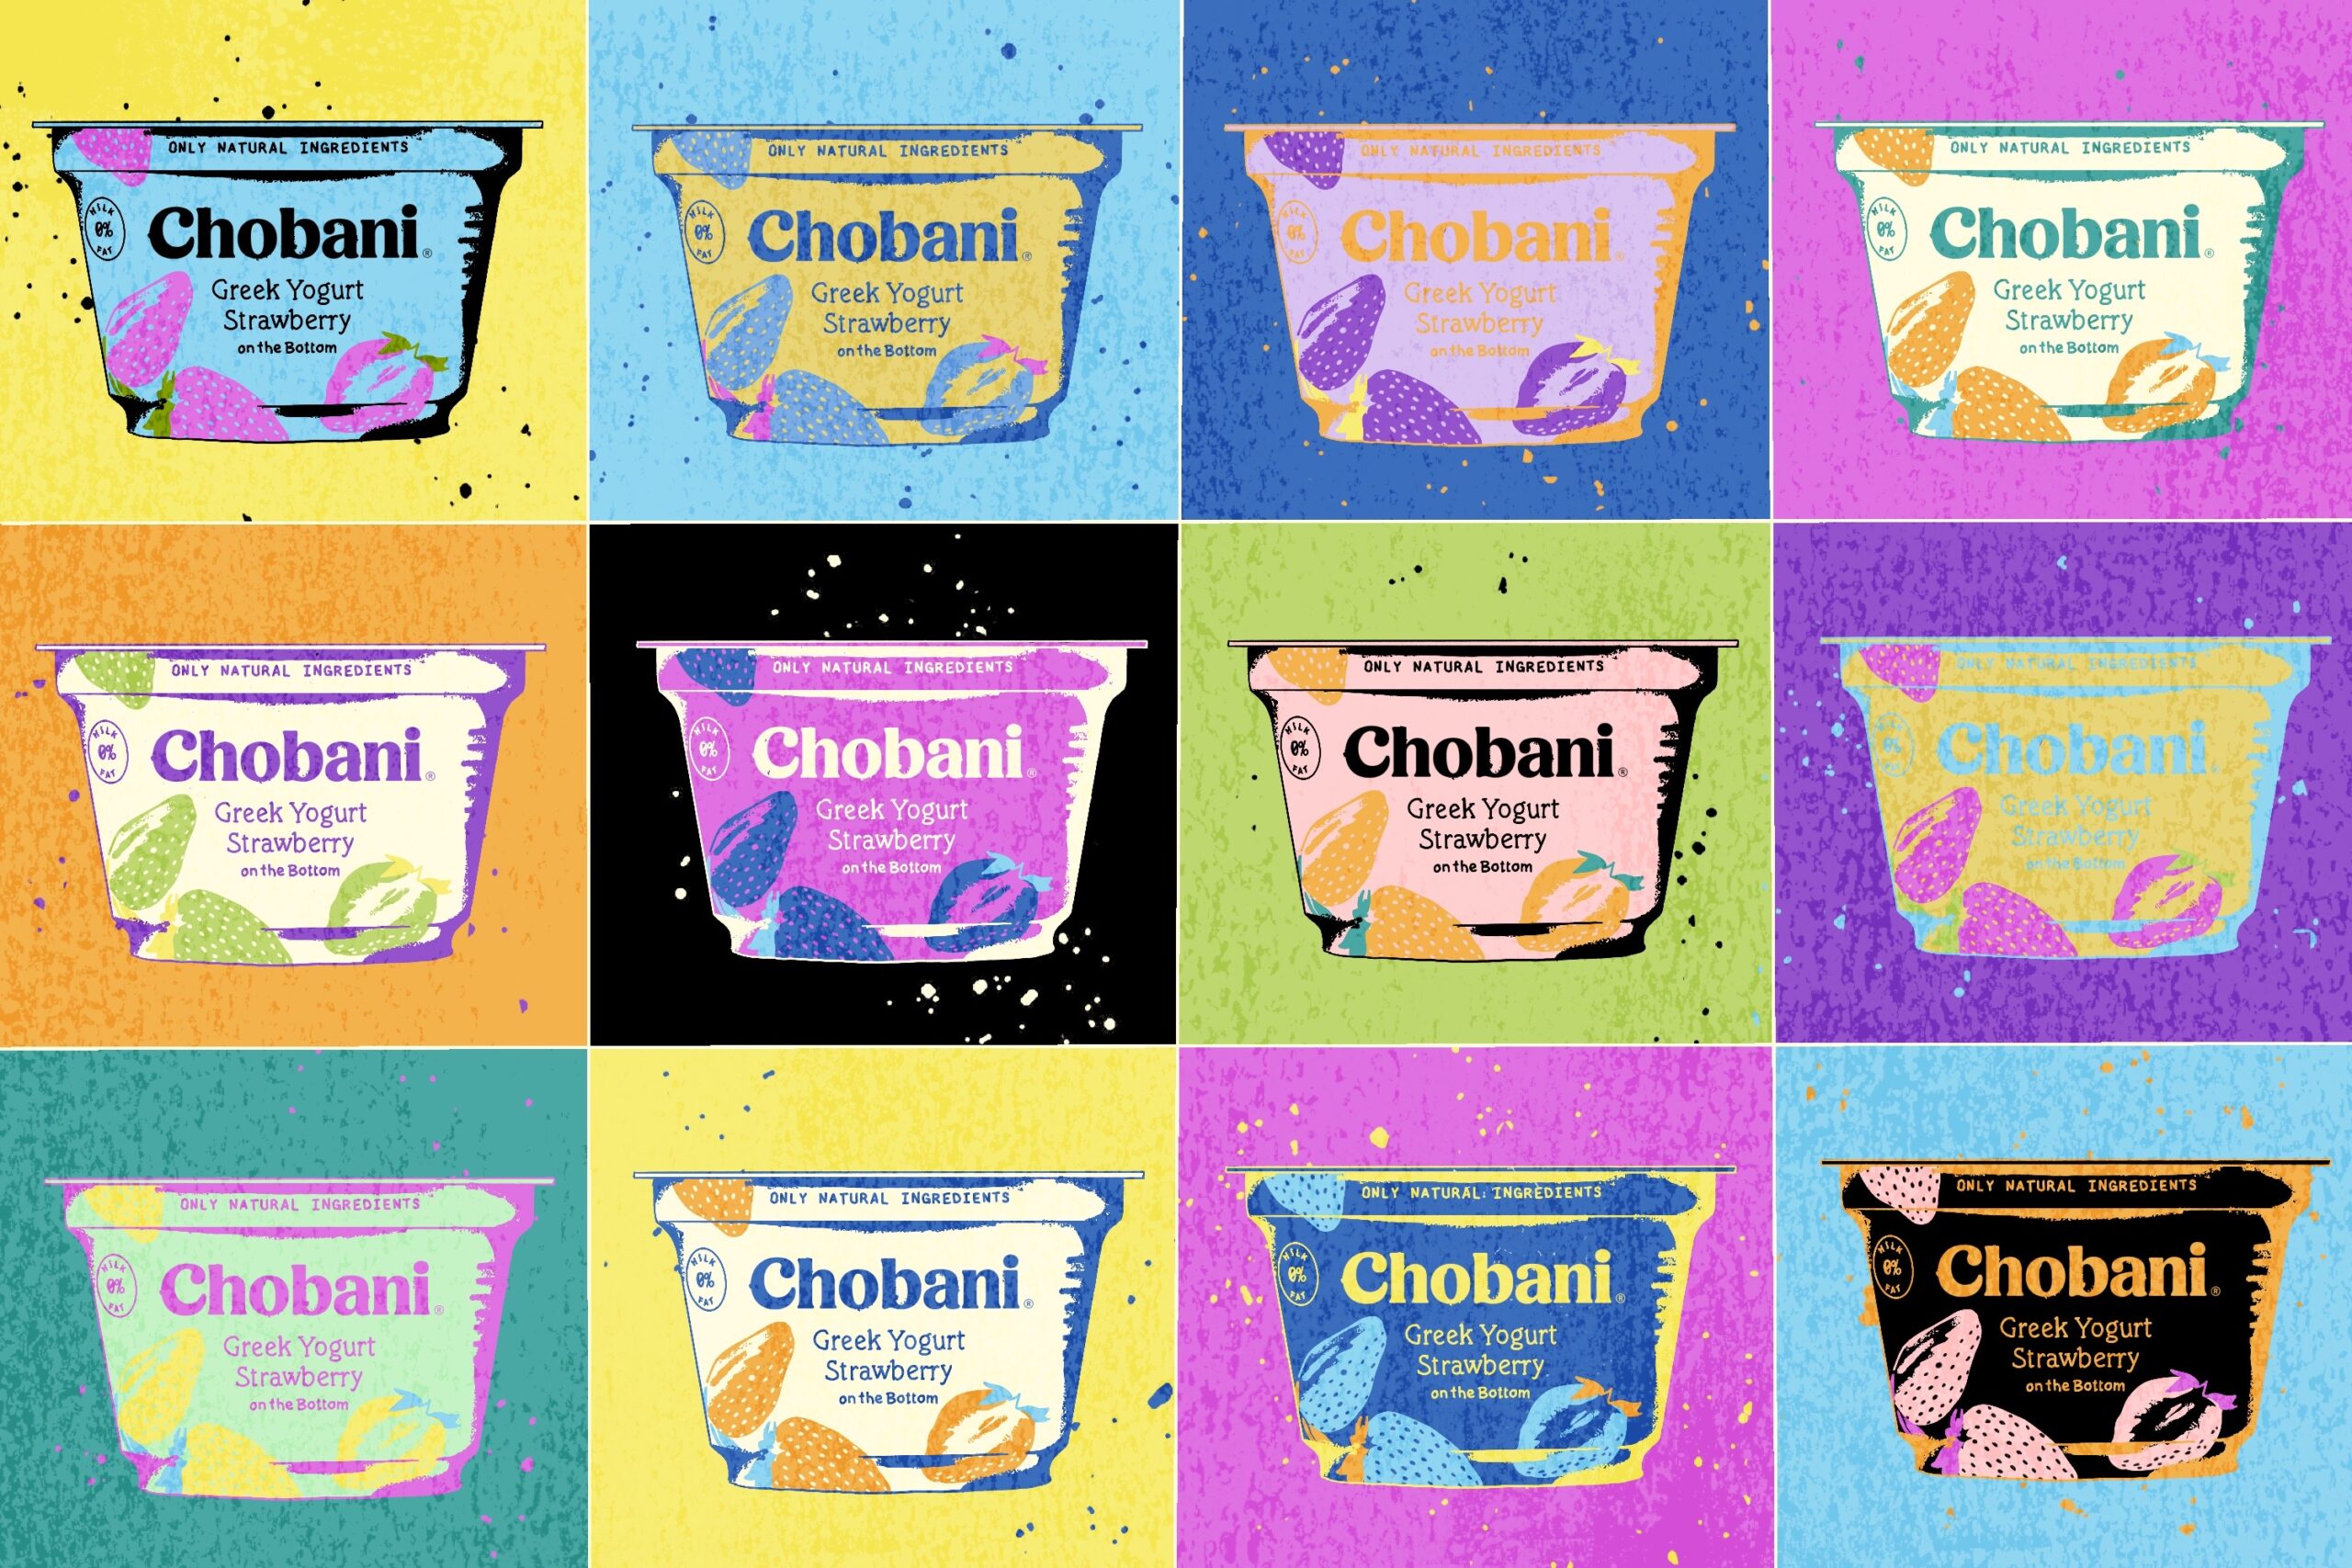 How Chobani Cut their Time-to-Fill in Half with Grayscale